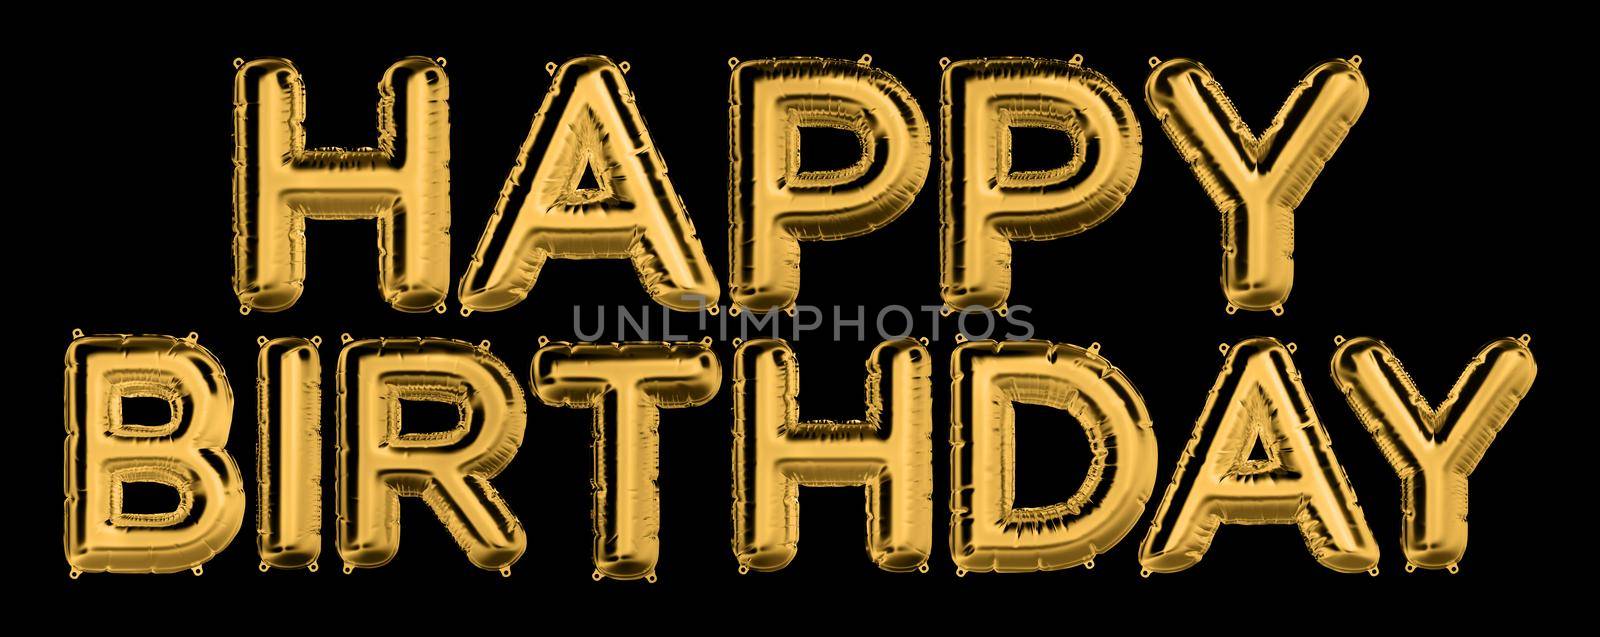 3D Render of Golden inflatable foil balloons set. Bright party decoration figures. Happy Birthday. Beautiful letters for web design or cards on festive dark background. B-day celebration concept